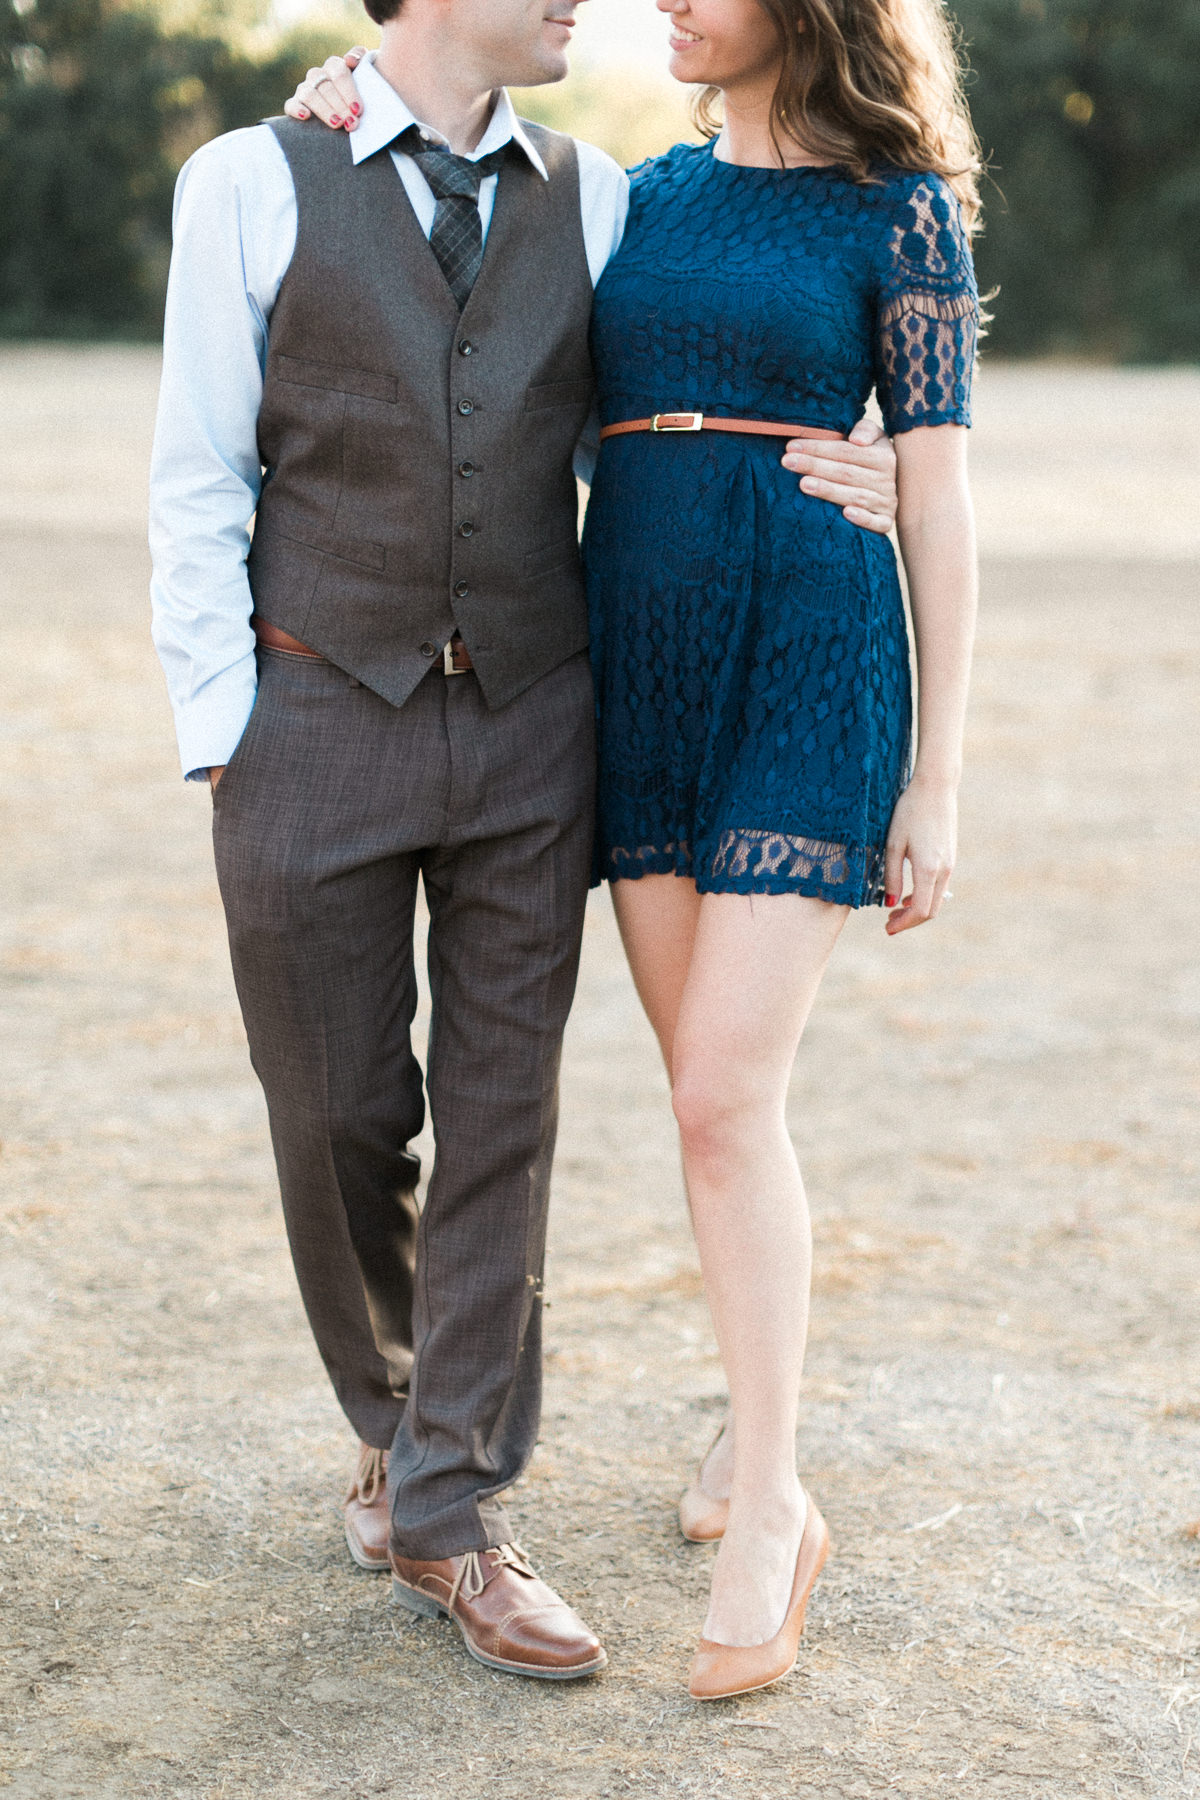 los-angeles-rustic-engagement-session-photography-0012